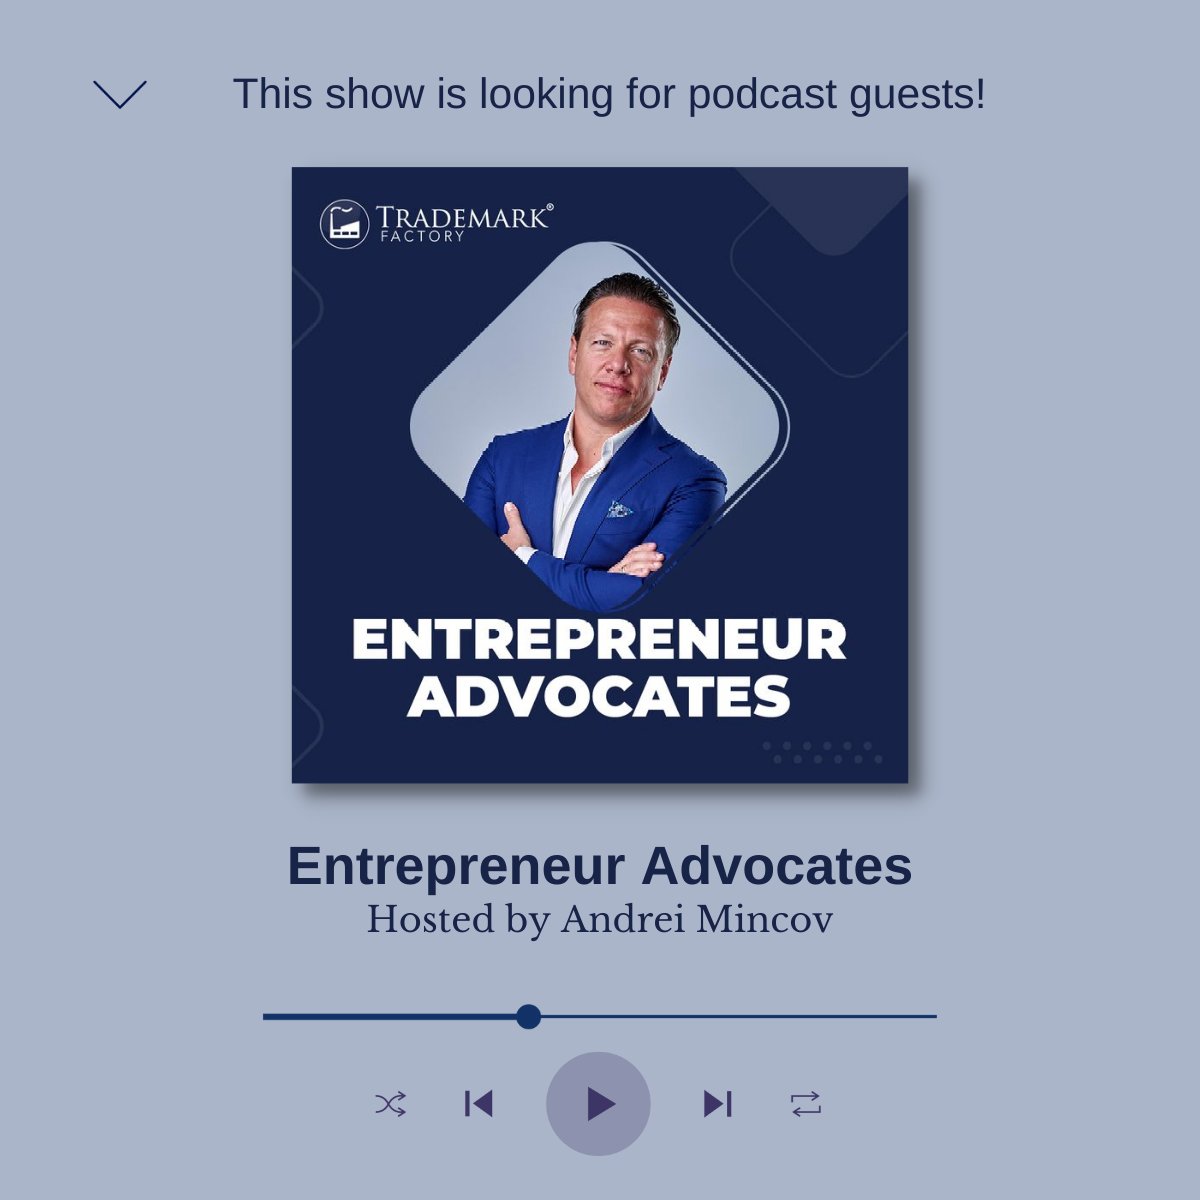 The Trademark Factory's Entrepreneur Advocates hosted by @RealTMFactory is on the hunt for guests—entrepreneurs or business owners who offer unique products or services. Apply here: go.trademarkfactory.com/podcast-guest #podcast #trademark #branding #findaguest #beaguest #journorequest